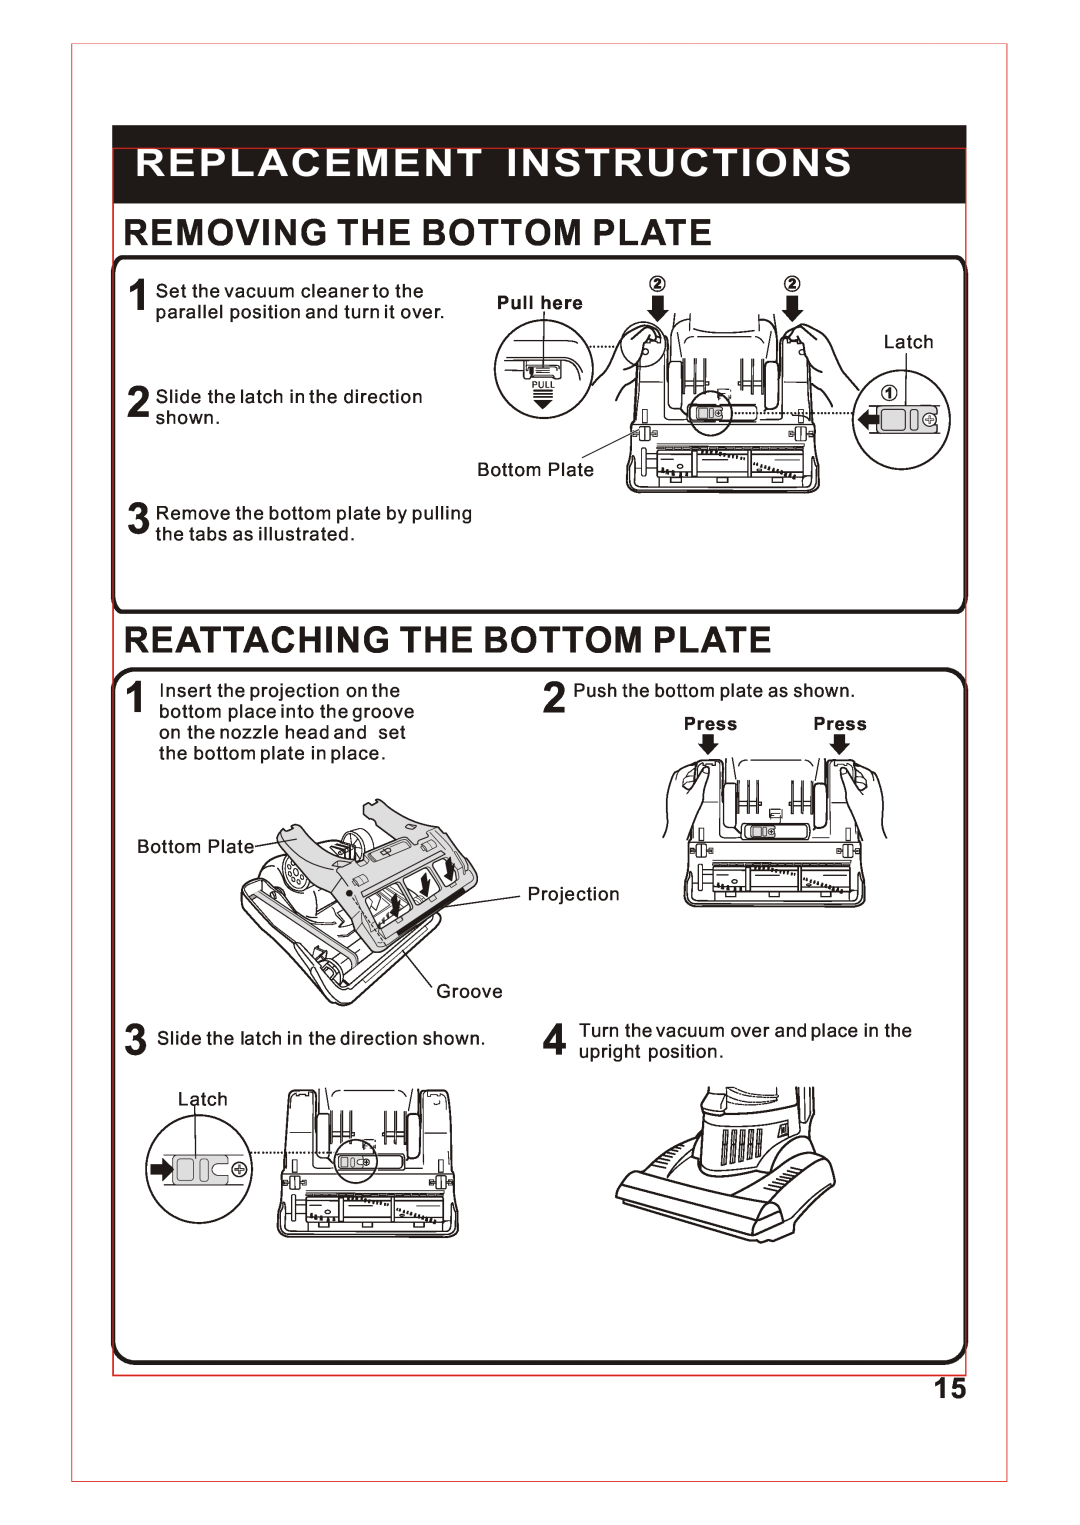 Fantom Vacuum FM740 B Replacement Instructions, Removing The Bottom Plate, Reattaching The Bottom Plate, Pull here 